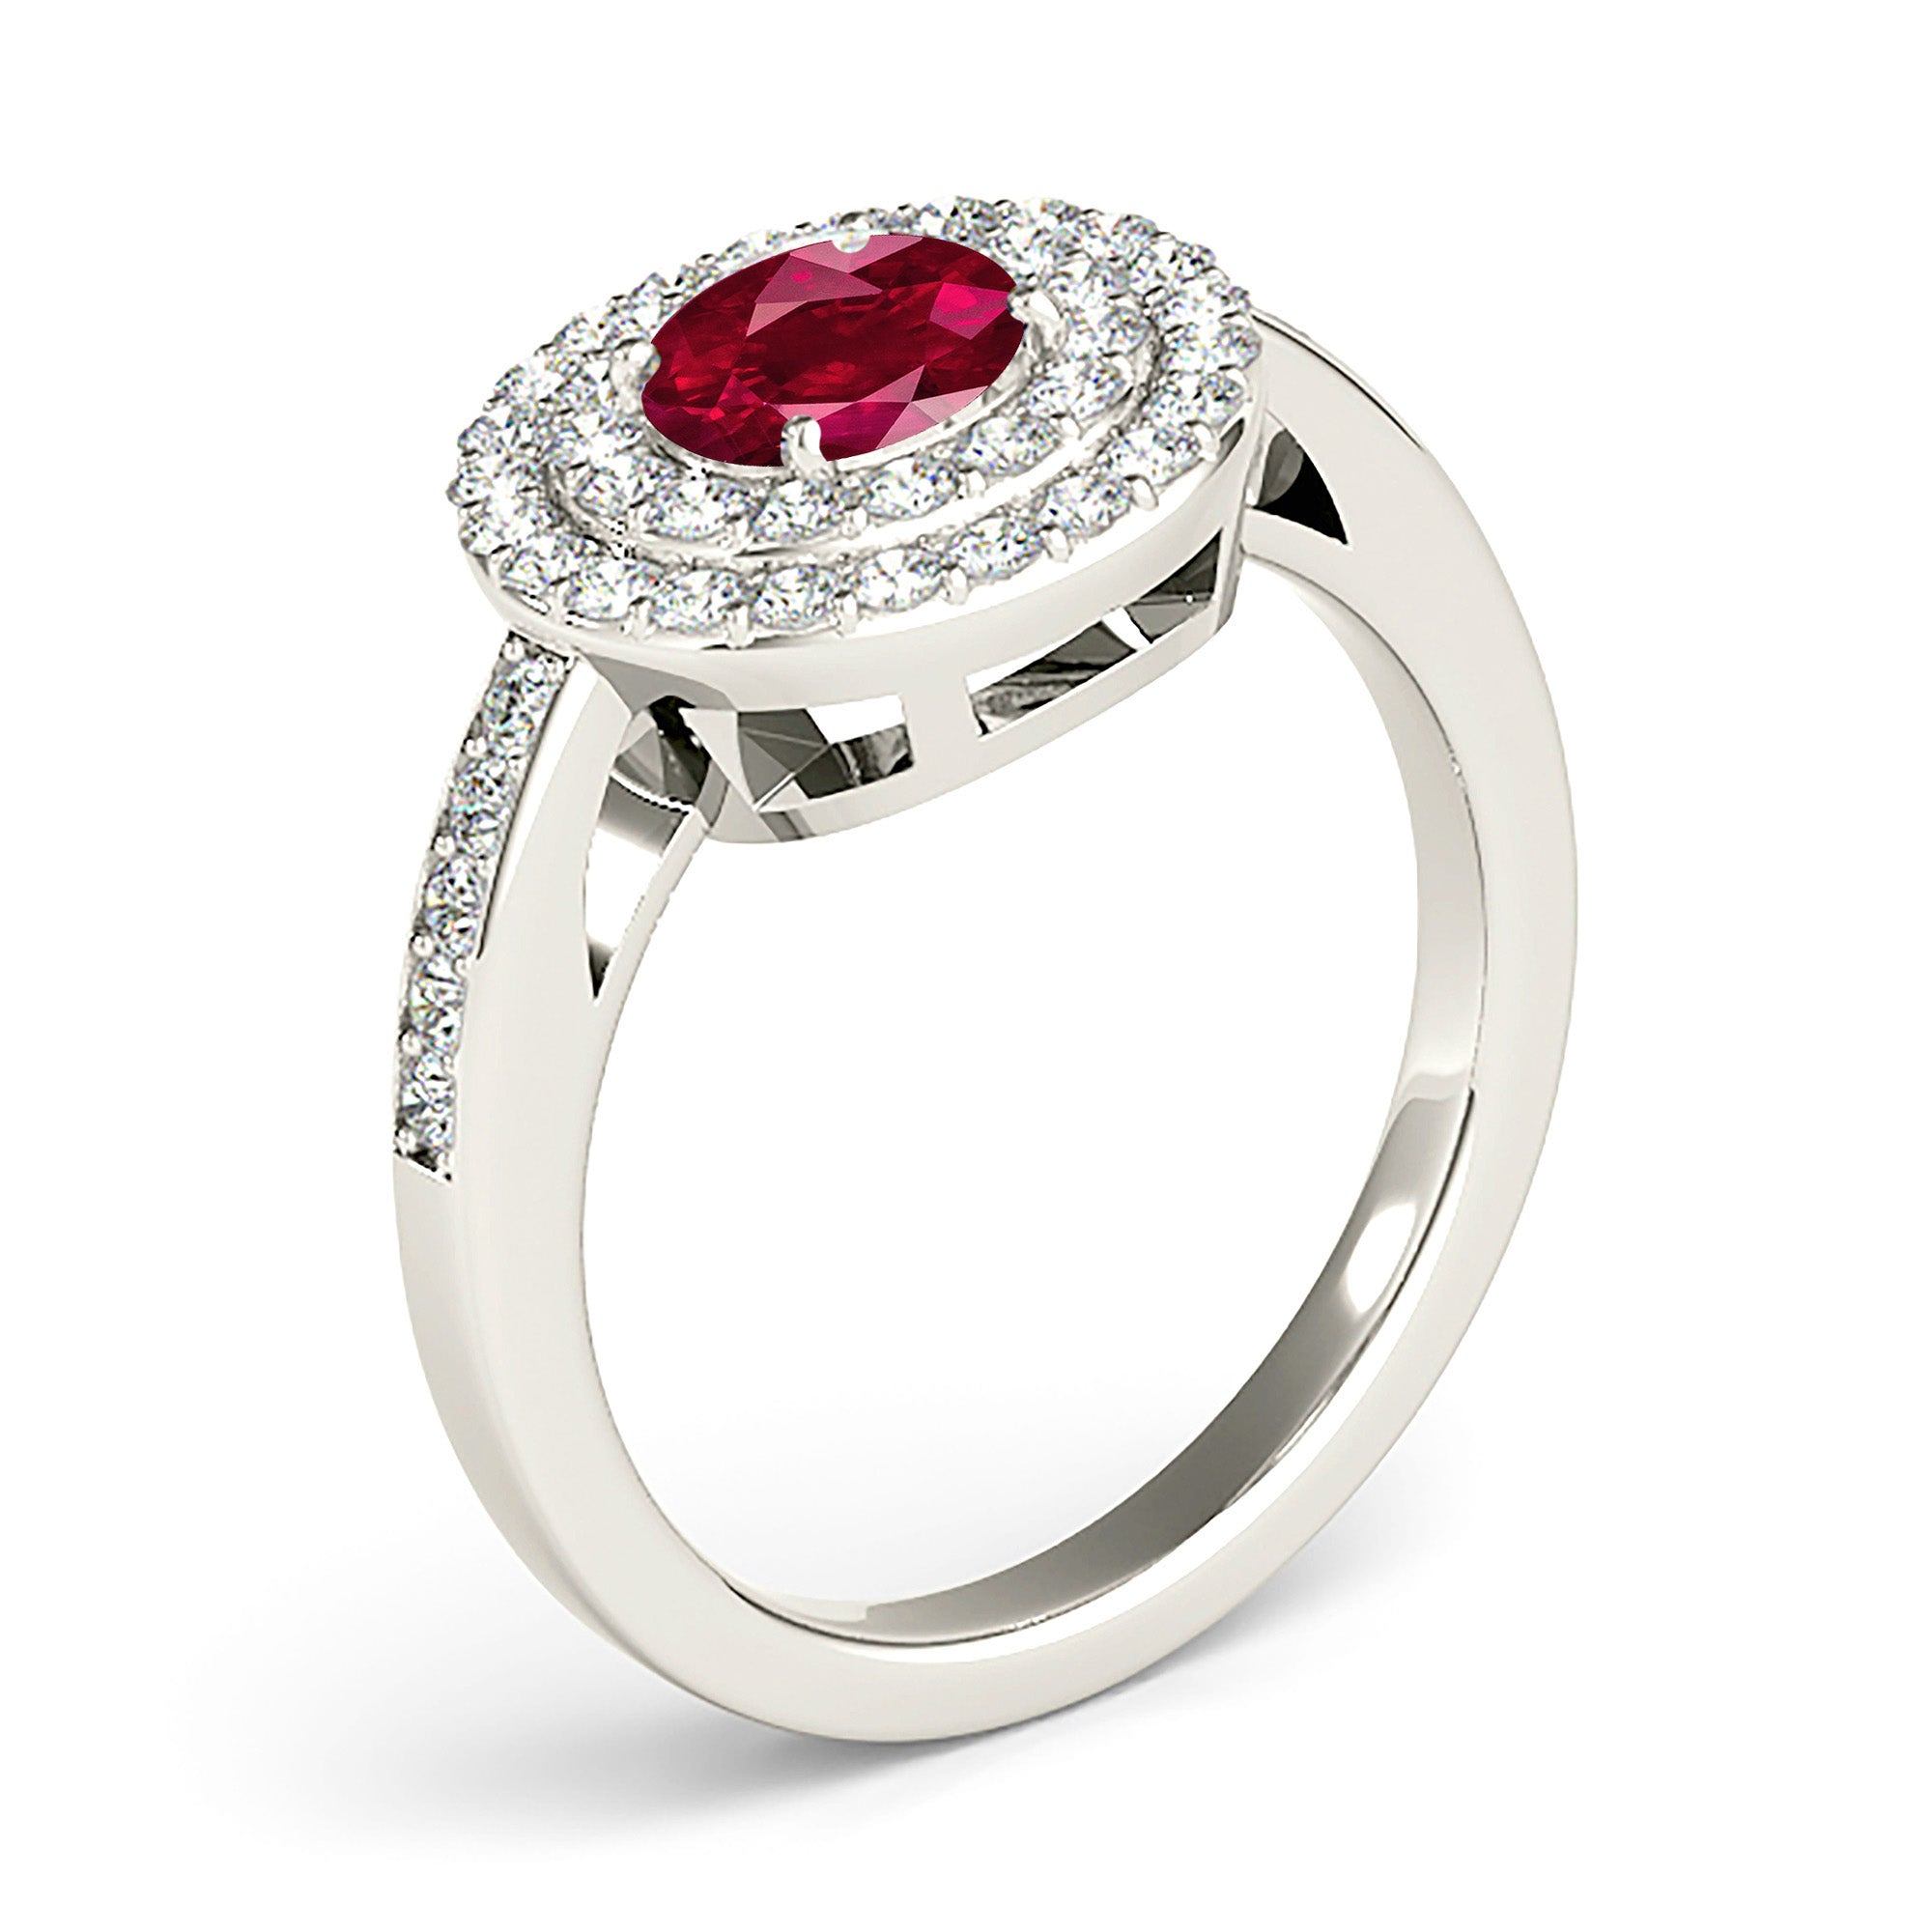 1.35 ct. Genuine Ruby Ring With 0.70 ctw. Diamond Double Row Halo And Delicate Diamond Band-in 14K/18K White, Yellow, Rose Gold and Platinum - Christmas Jewelry Gift -VIRABYANI